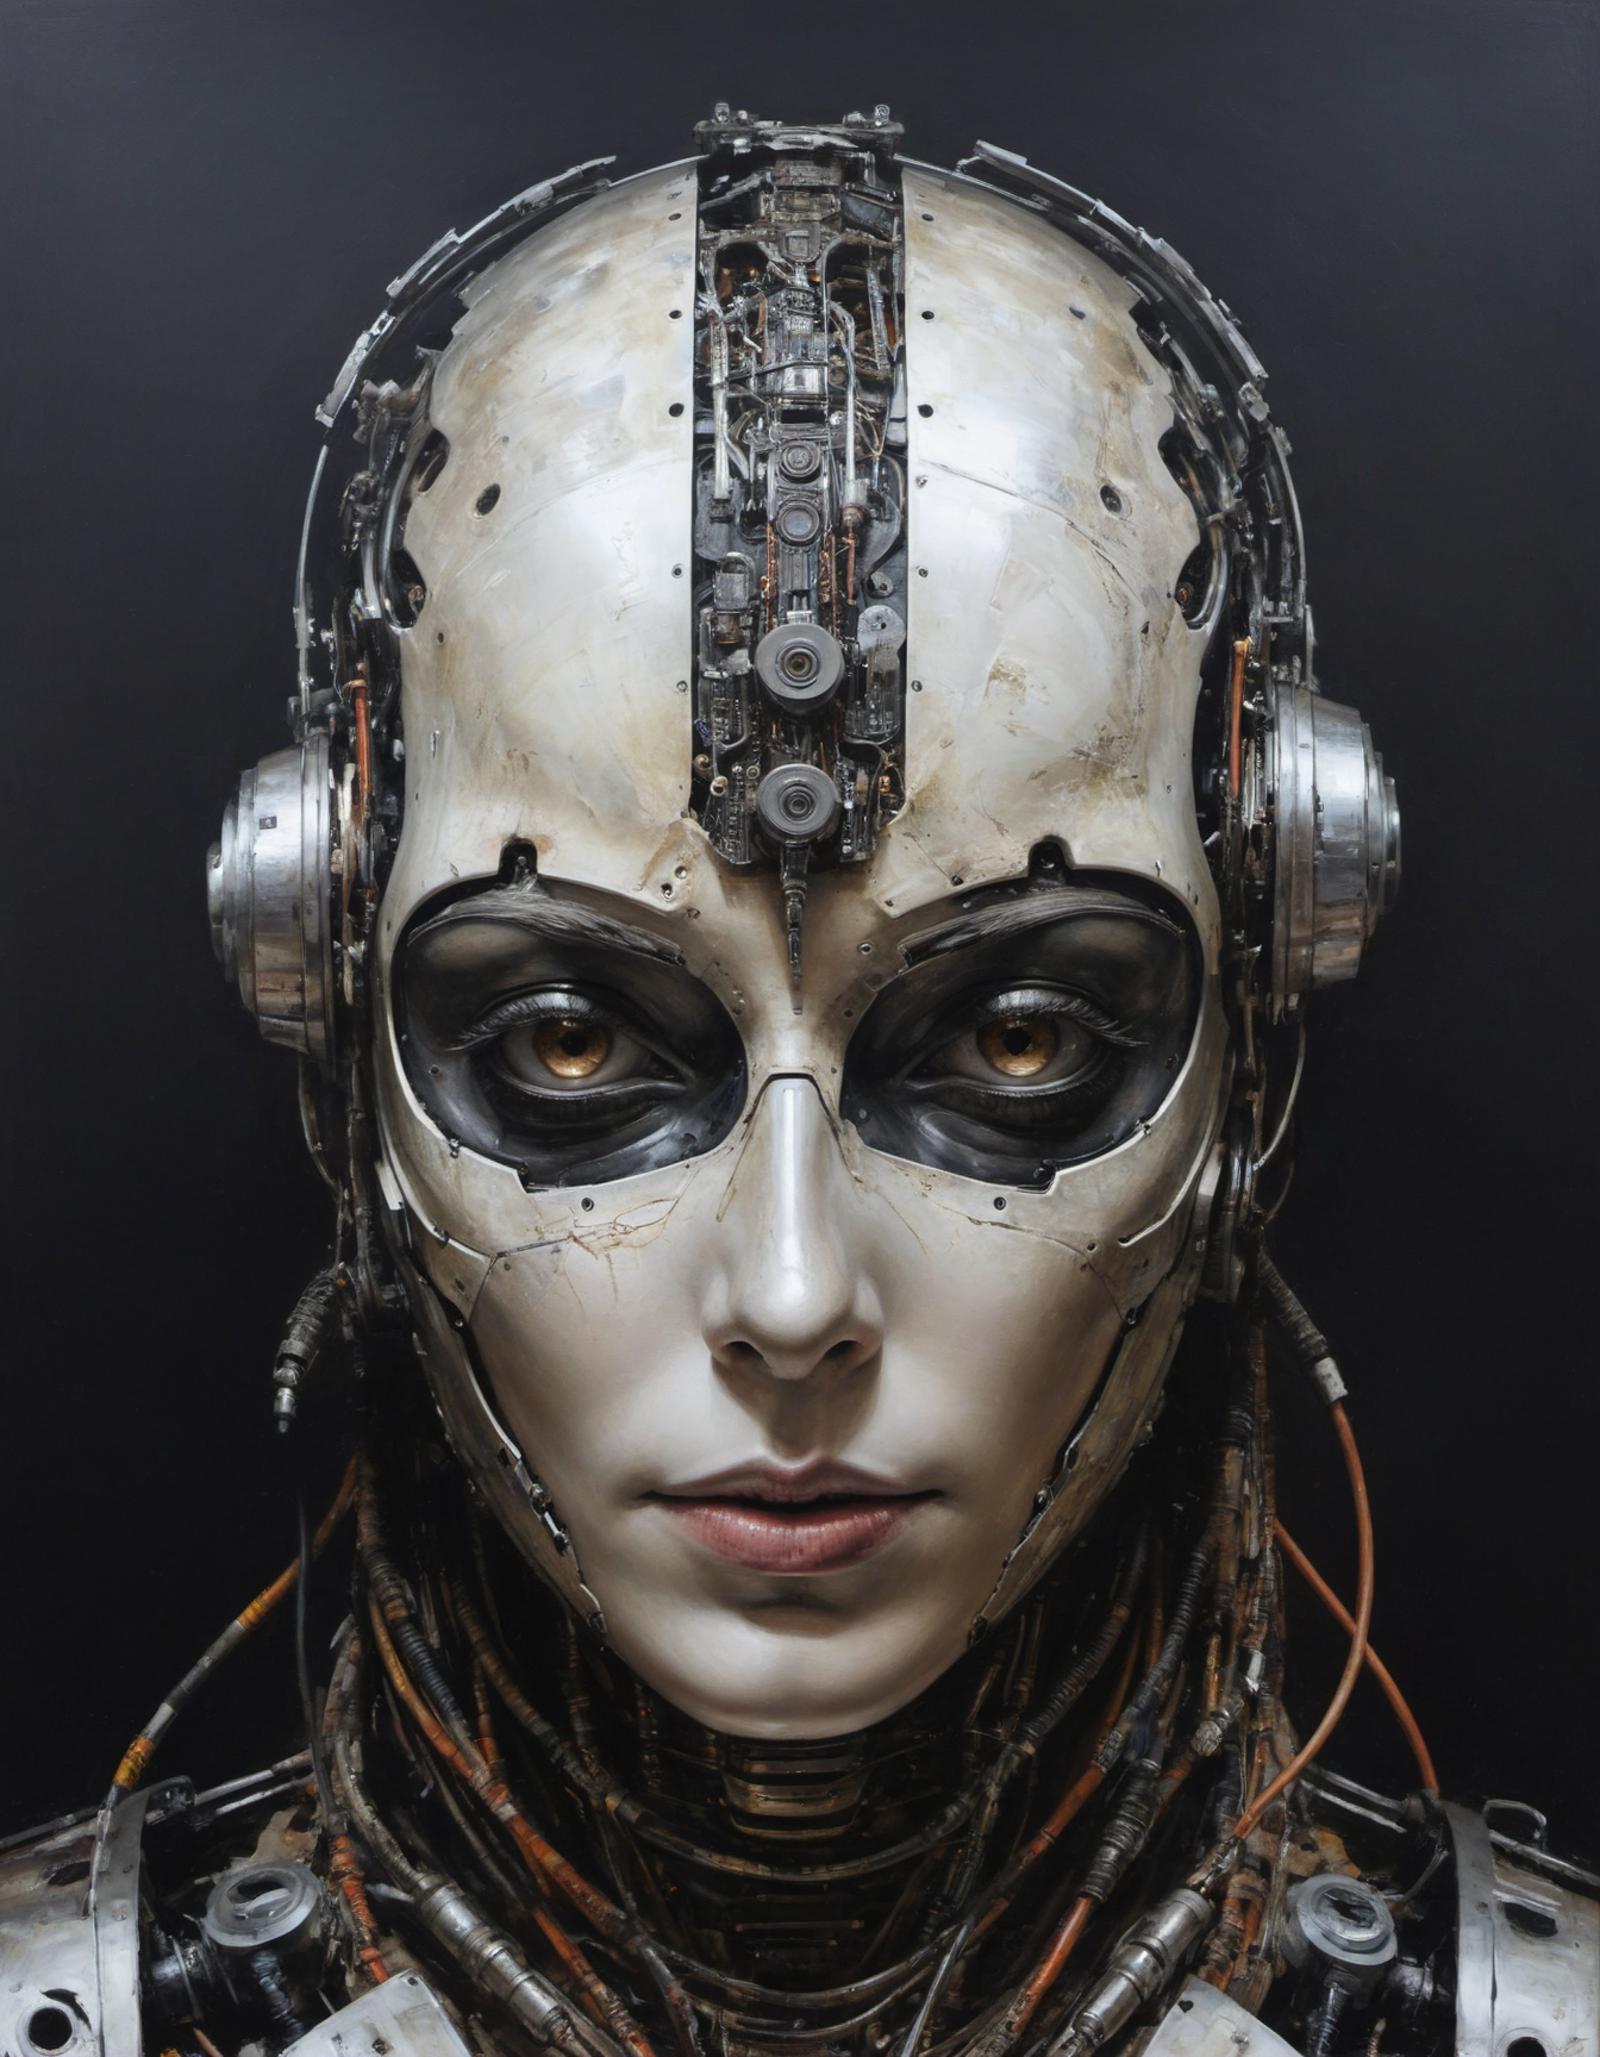 A robot head with a woman's face, wearing a silver helmet and surrounded by cables.